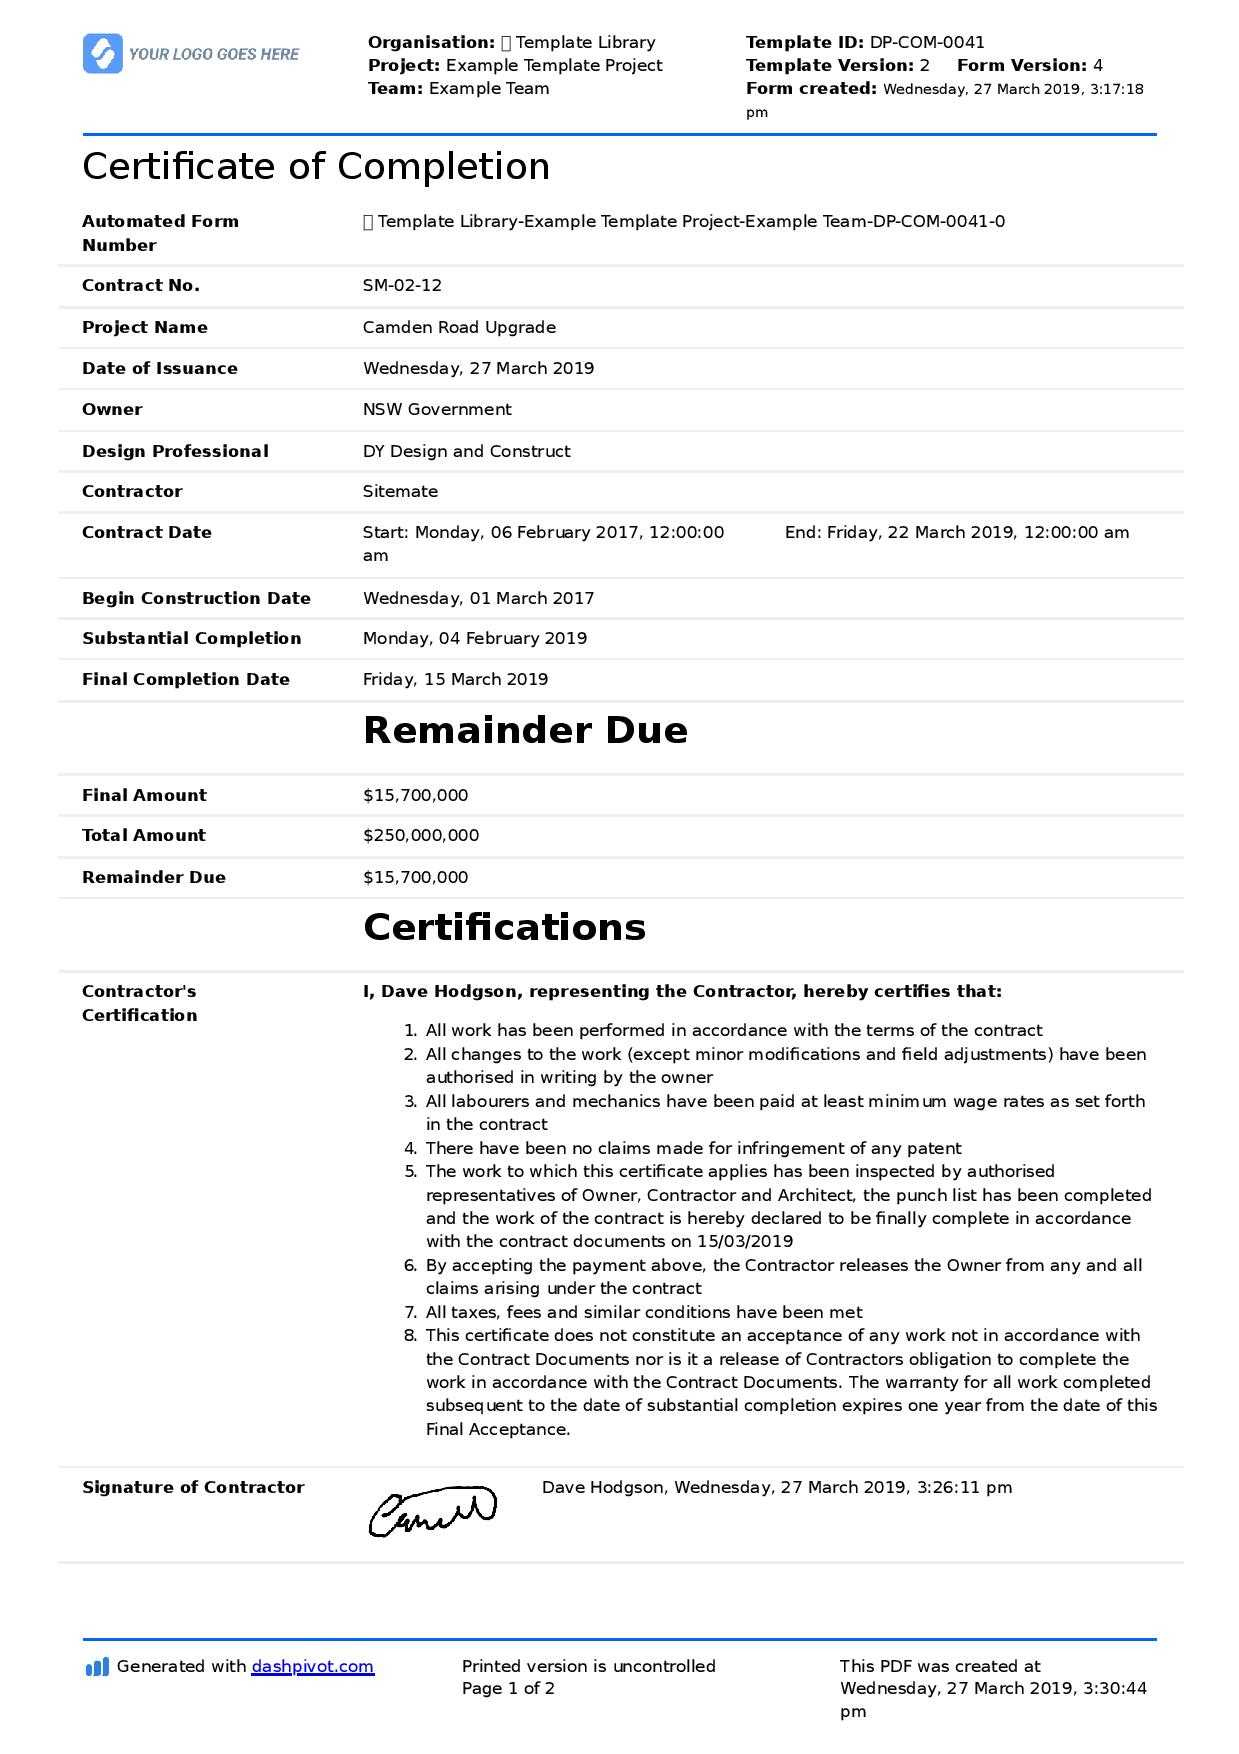 Construction Certificate Of Completion Template - Best Business Templates inside Awesome Certificate Of Completion Template Construction